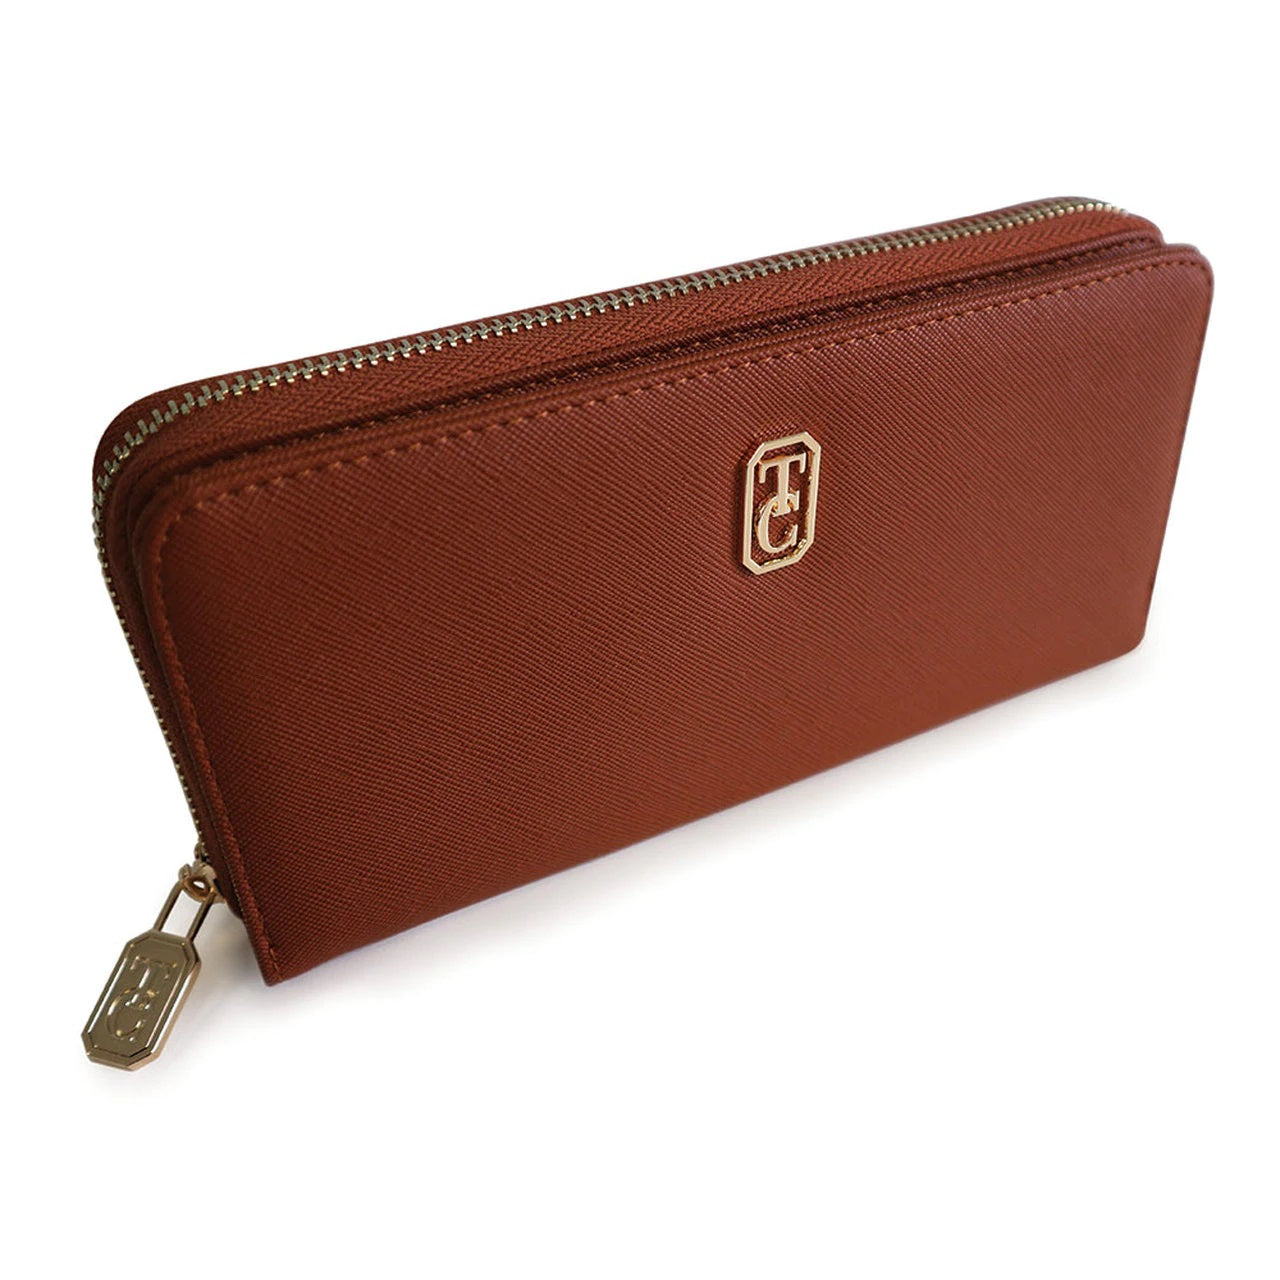 Wallet Umbria - Tan by Tipperary Crystal  Crafted in PU, this sleek case is the ideal all-in-one accessory. A must have when travelling, tuck it into your carry-all for everyday convenience.